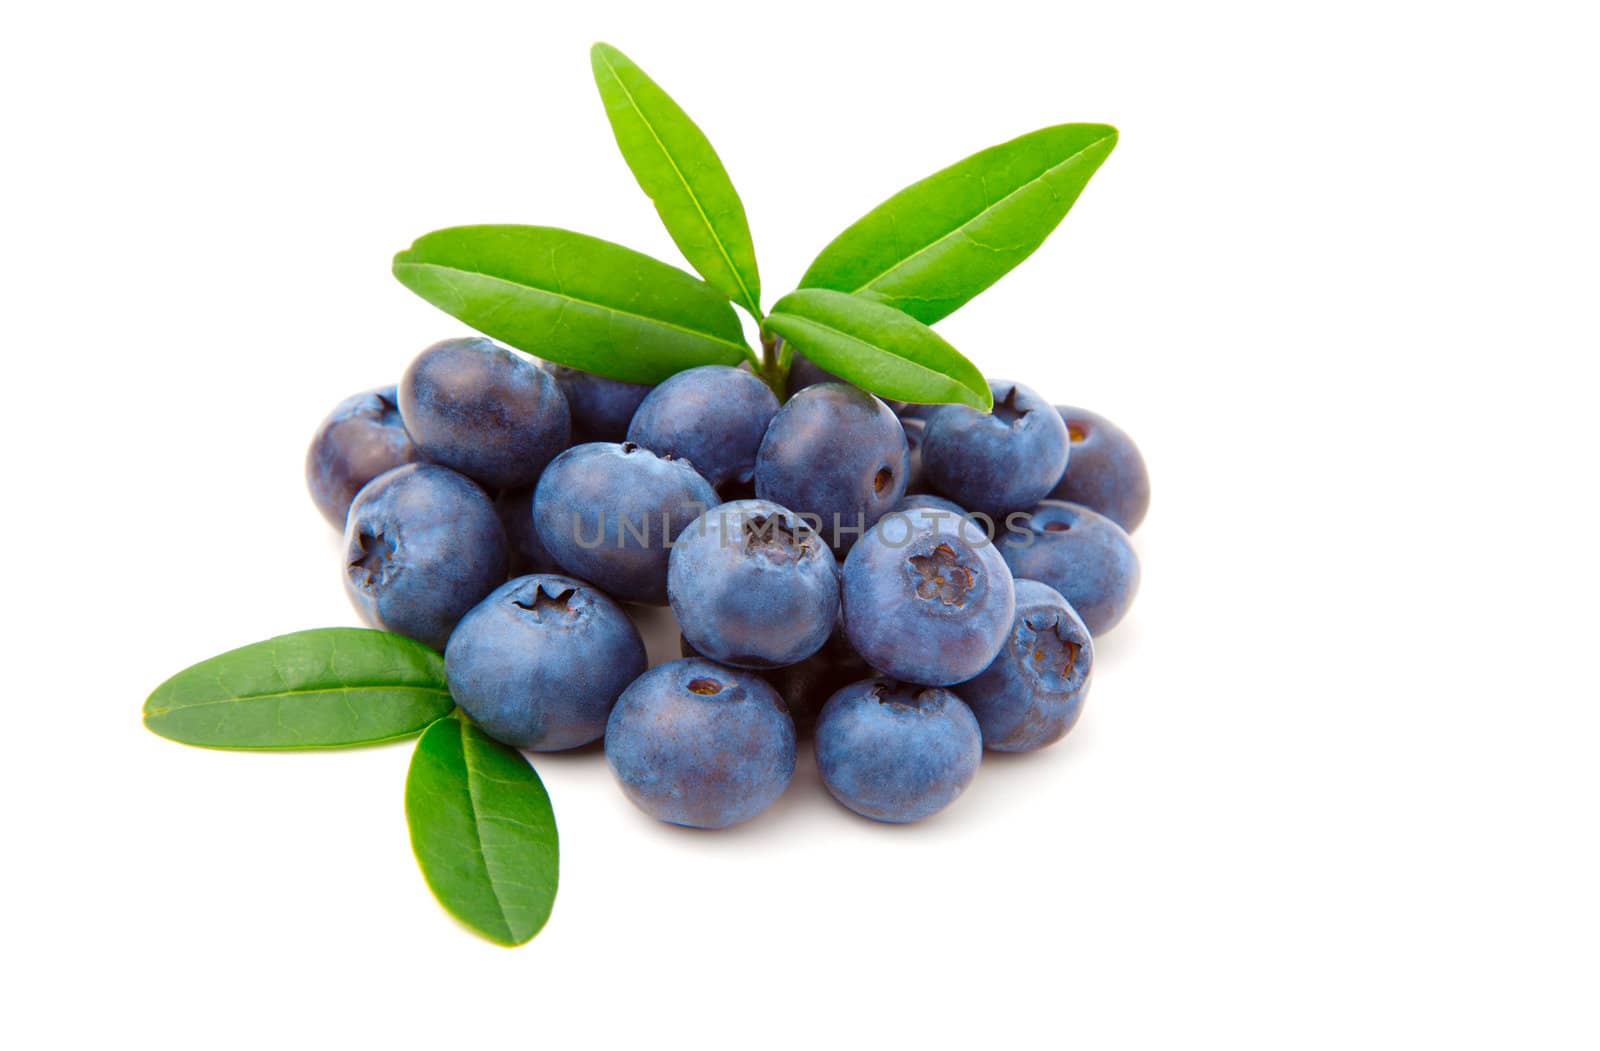 Blueberries with green leaves isolated on white background  by motorolka